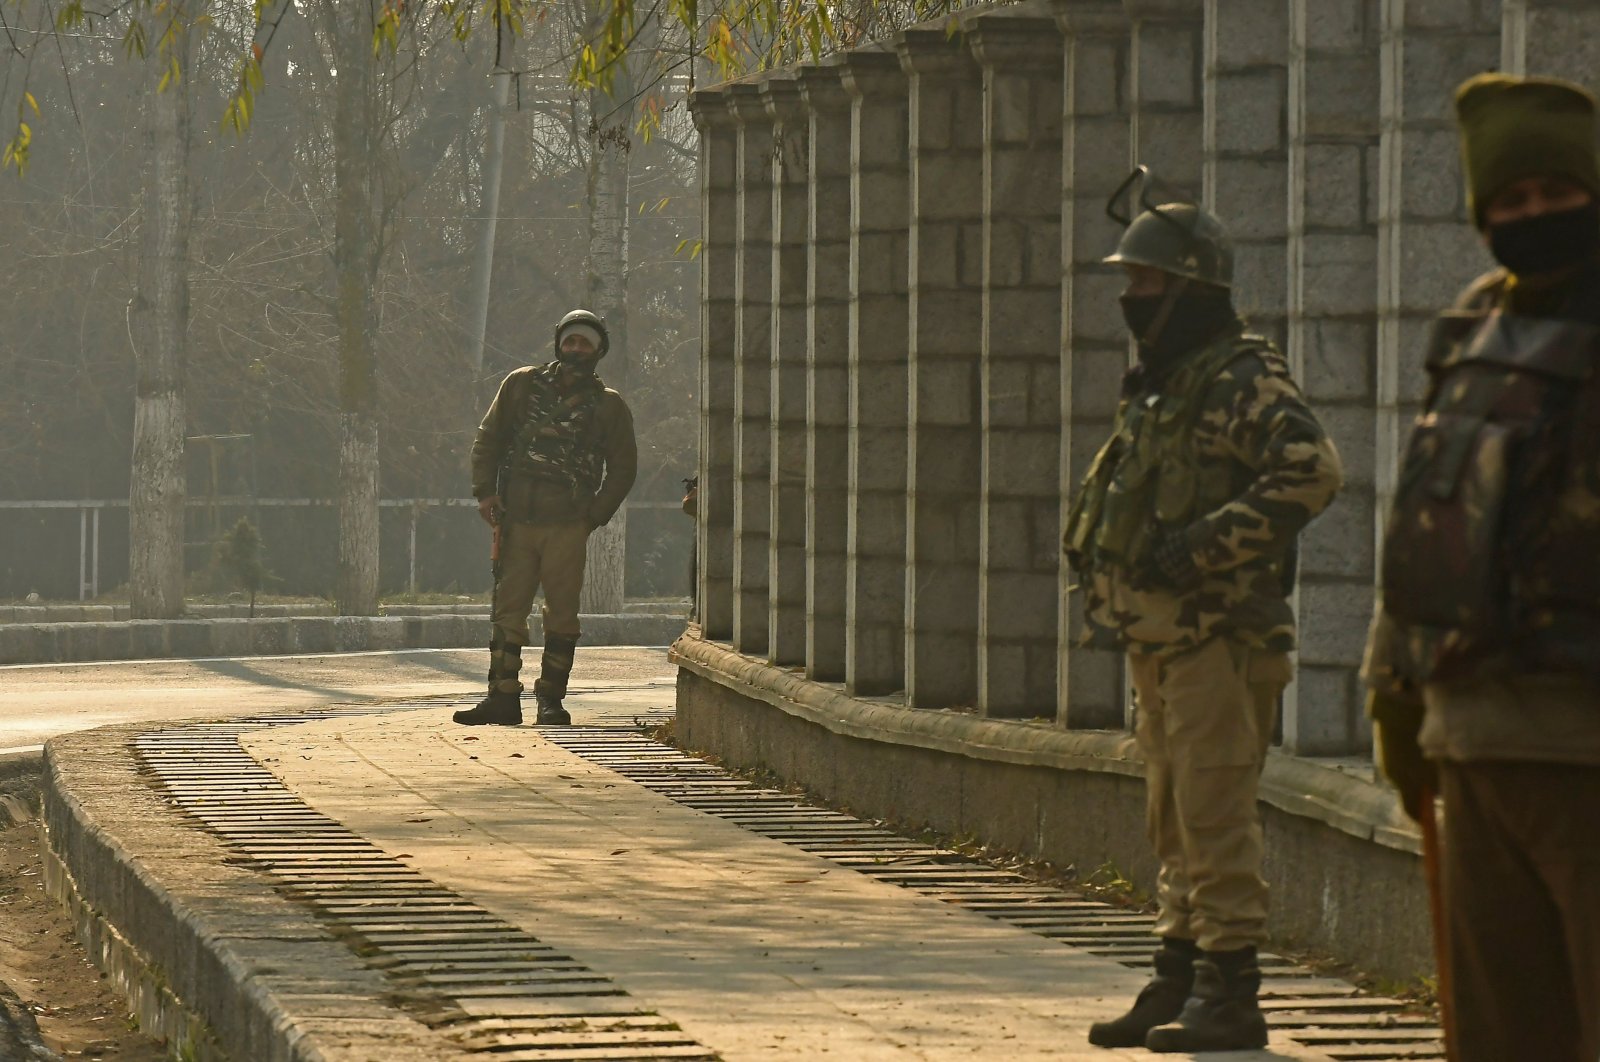 Indian paramilitary troopers stand guard outside a counting center for the District Development Council (DDC) polls in Srinagar on Dec. 22, 2020. (AFP Photo)